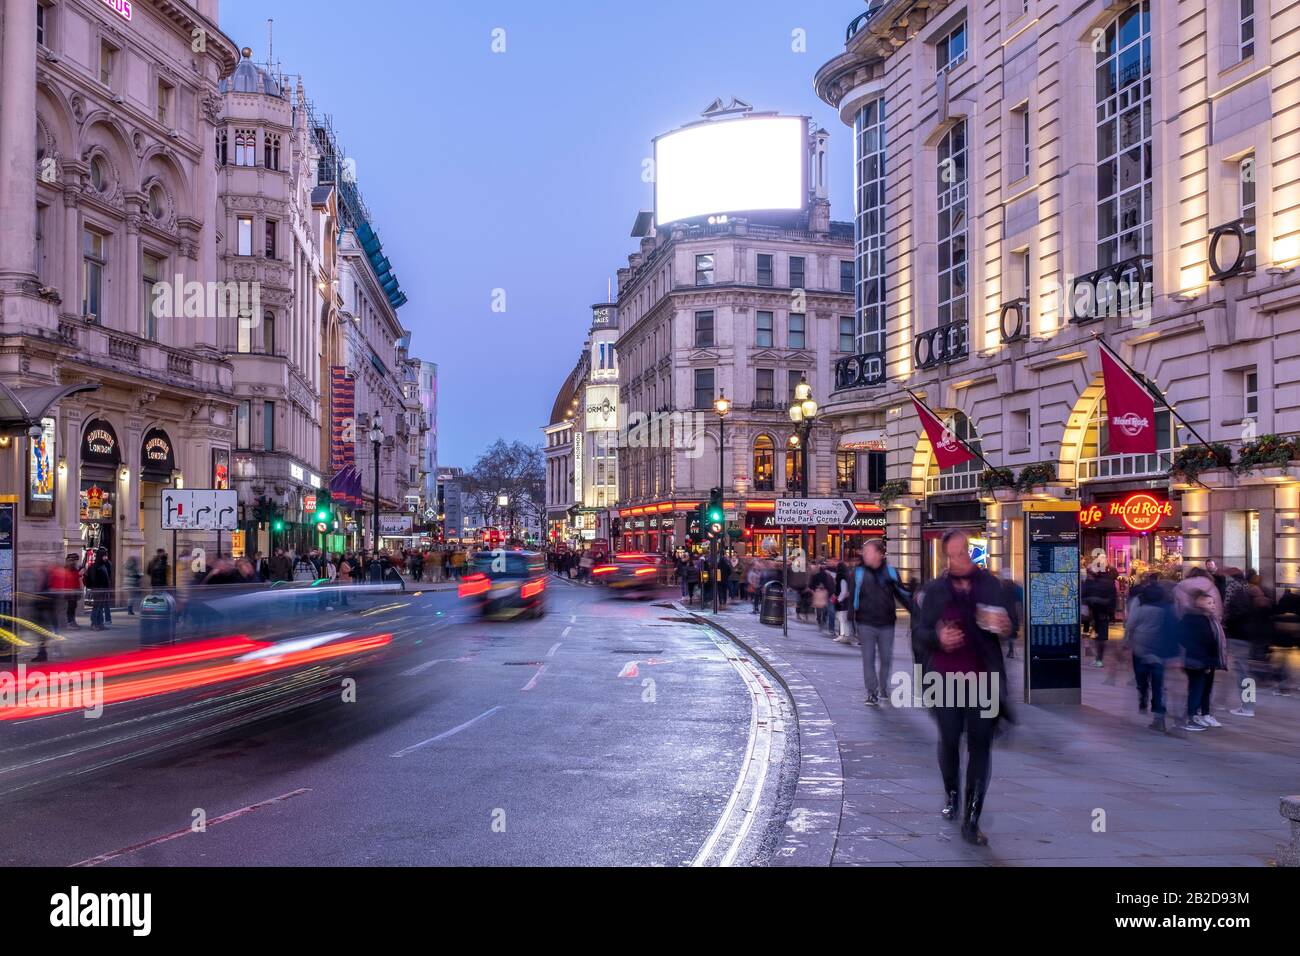 London, Piccadilly Circus- traffic and pedestrians on Coventry street at night Stock Photo